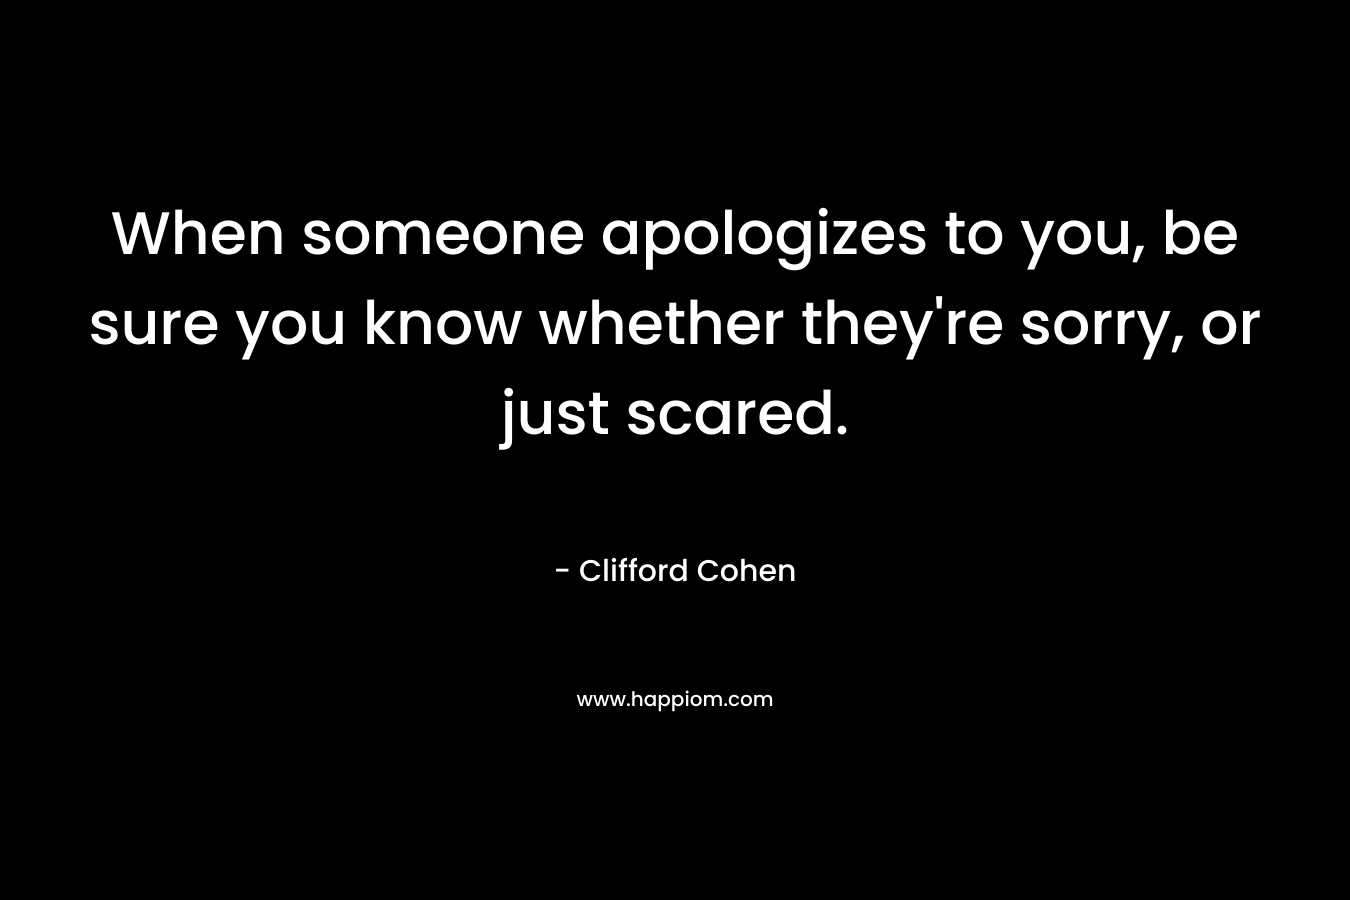 When someone apologizes to you, be sure you know whether they’re sorry, or just scared. – Clifford Cohen